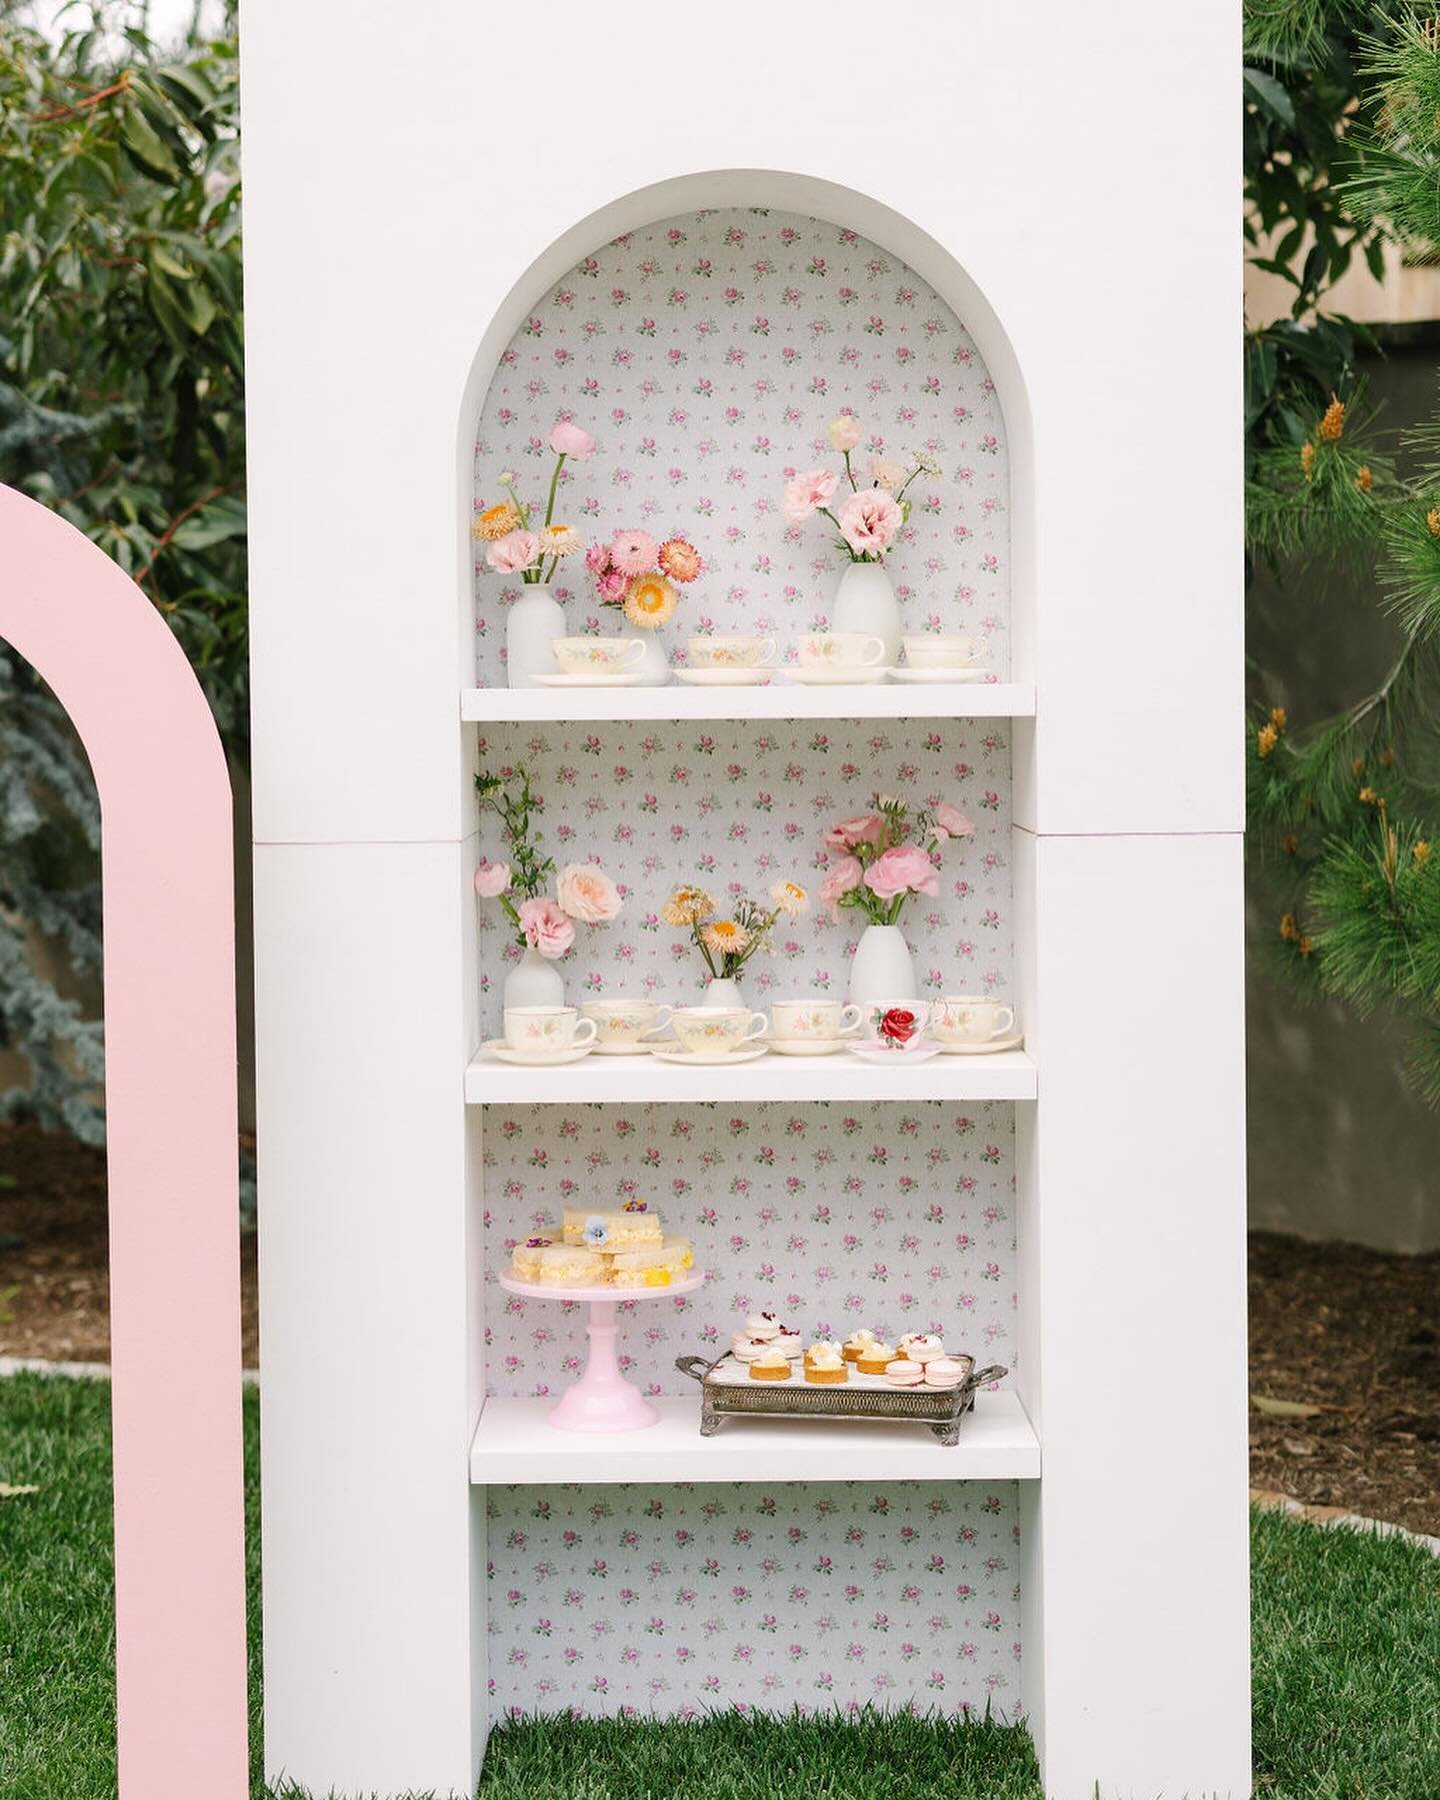 From our tea sandwiches to our desserts, we&rsquo;re all about adding charming, little details to our menu items. 🌼✨

Vendors - Design &amp; Planning - @beijosevents / Photographer - @jessicalynn_photo / Catering - @_taylormadecatering / Florals - @